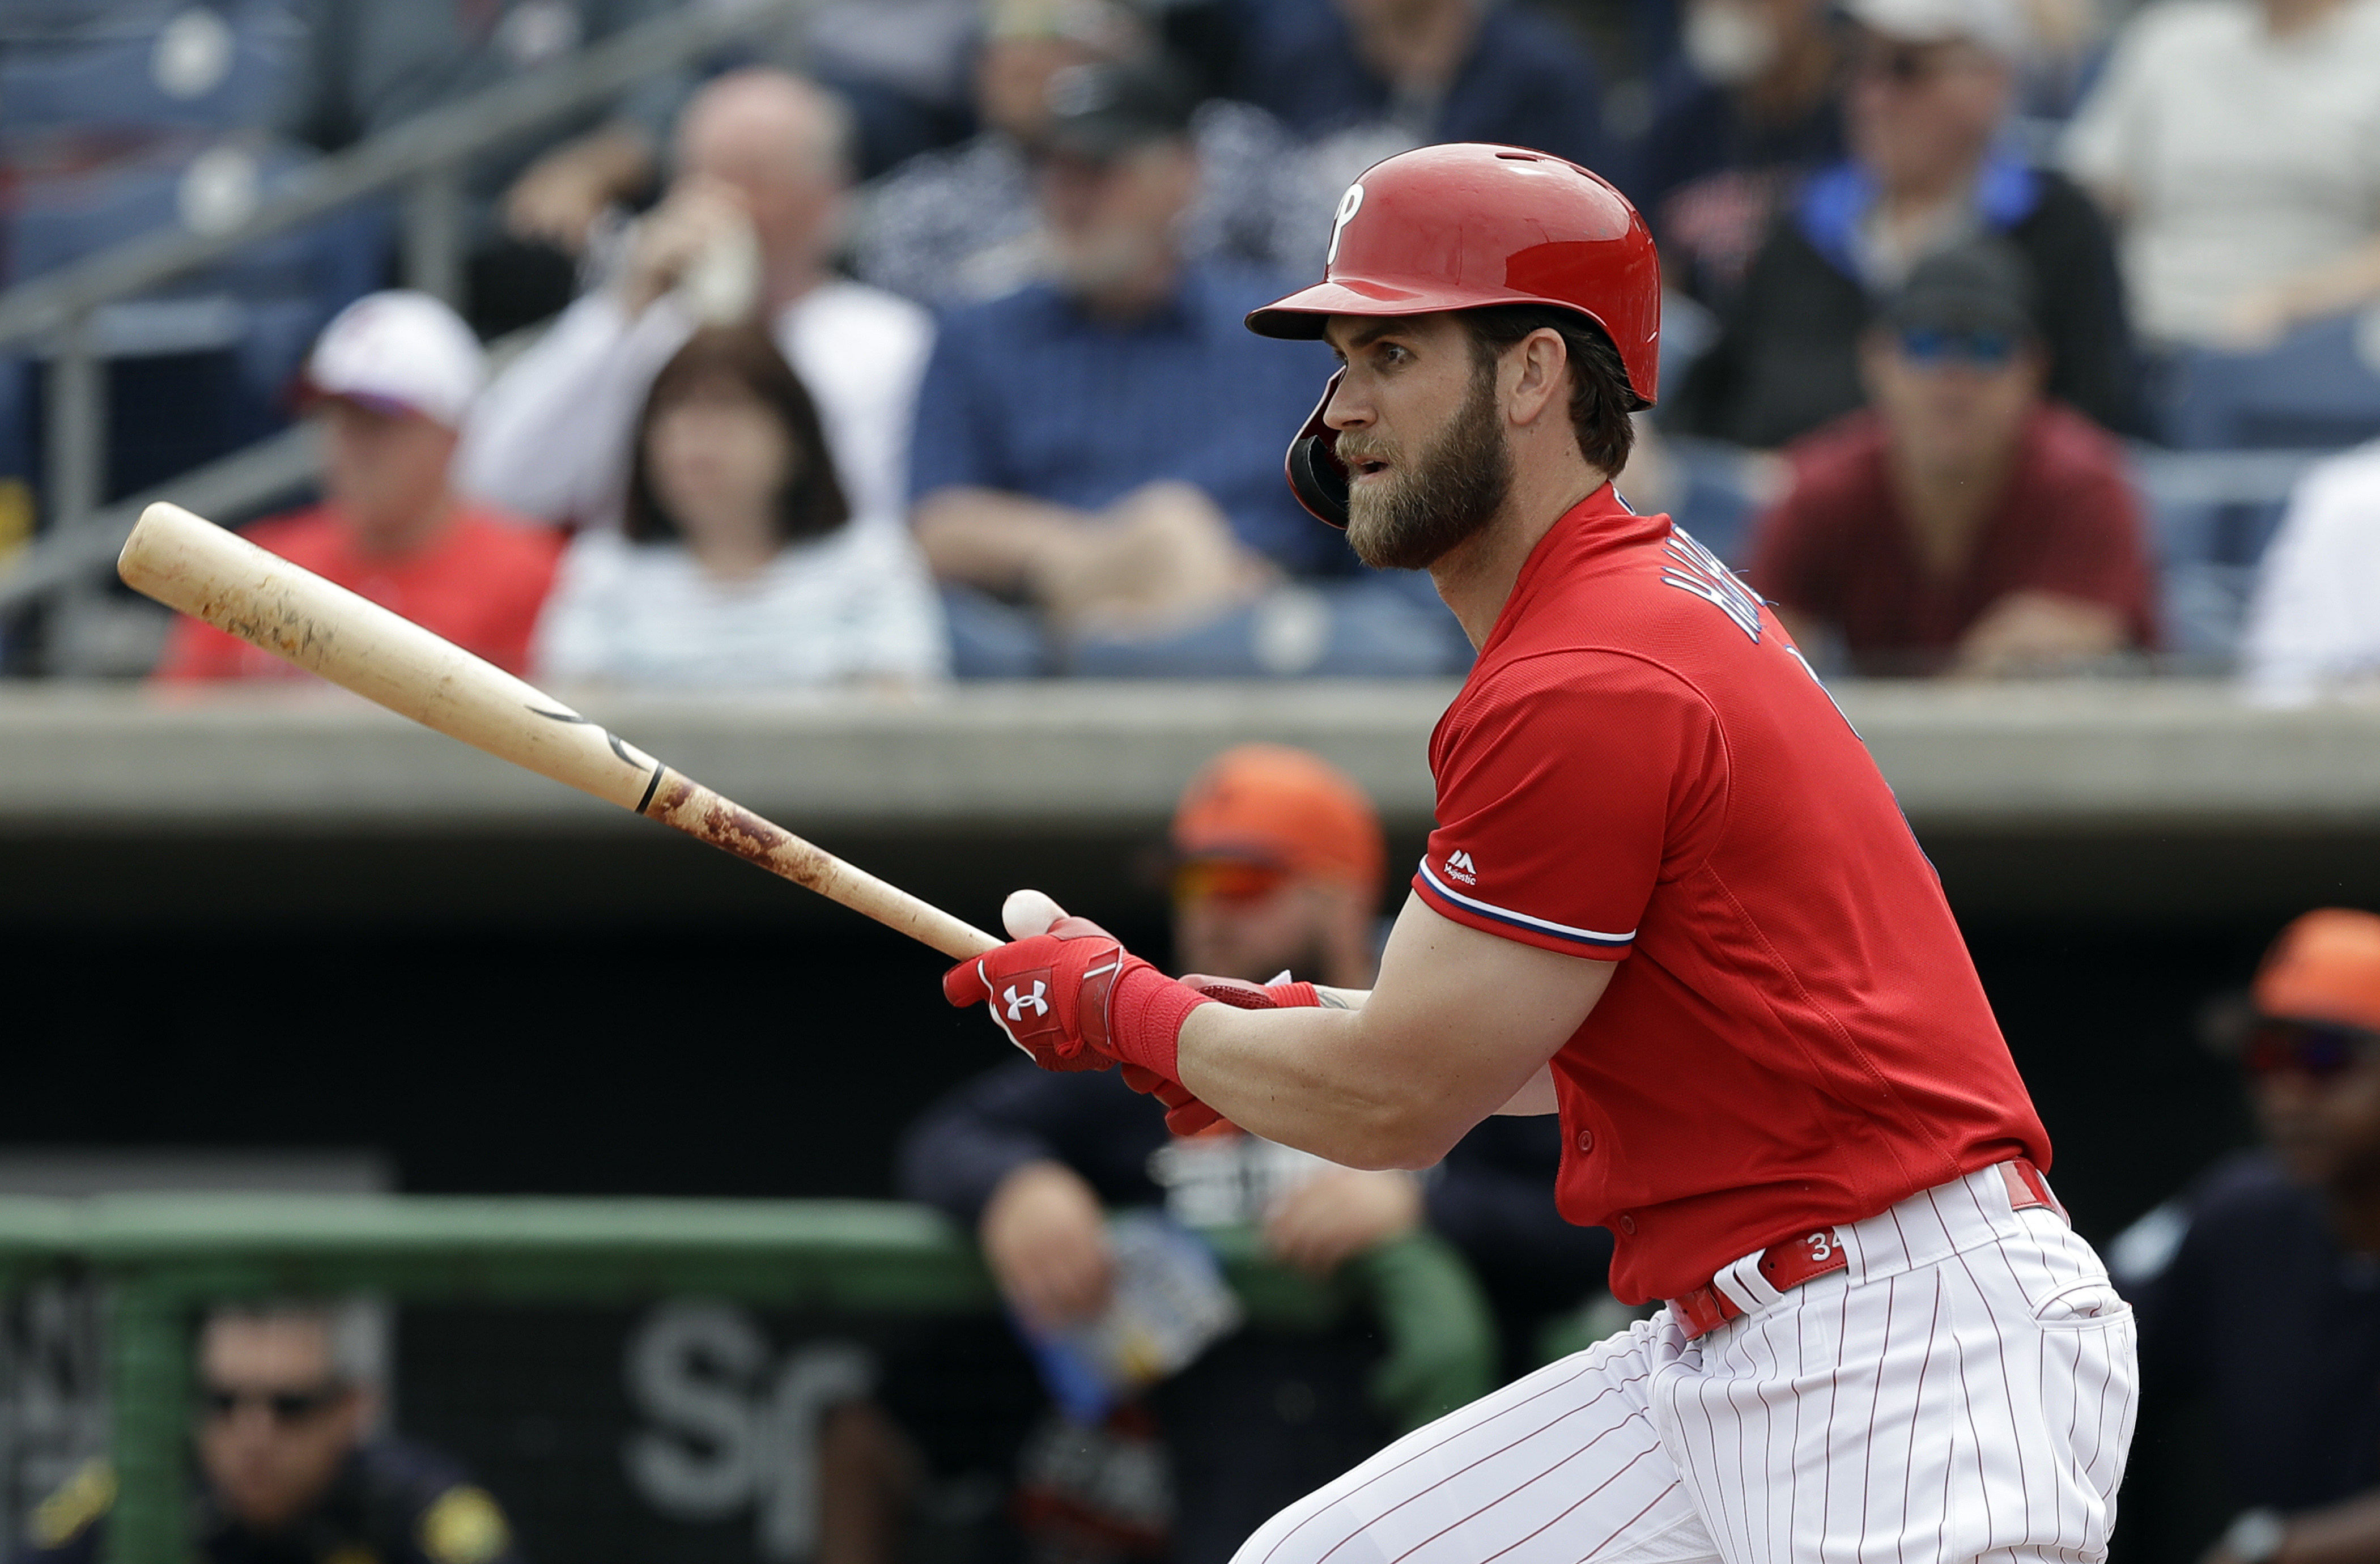 Phils’ Harper hits first HRs; ‘Cutch, Realmuto also go deep